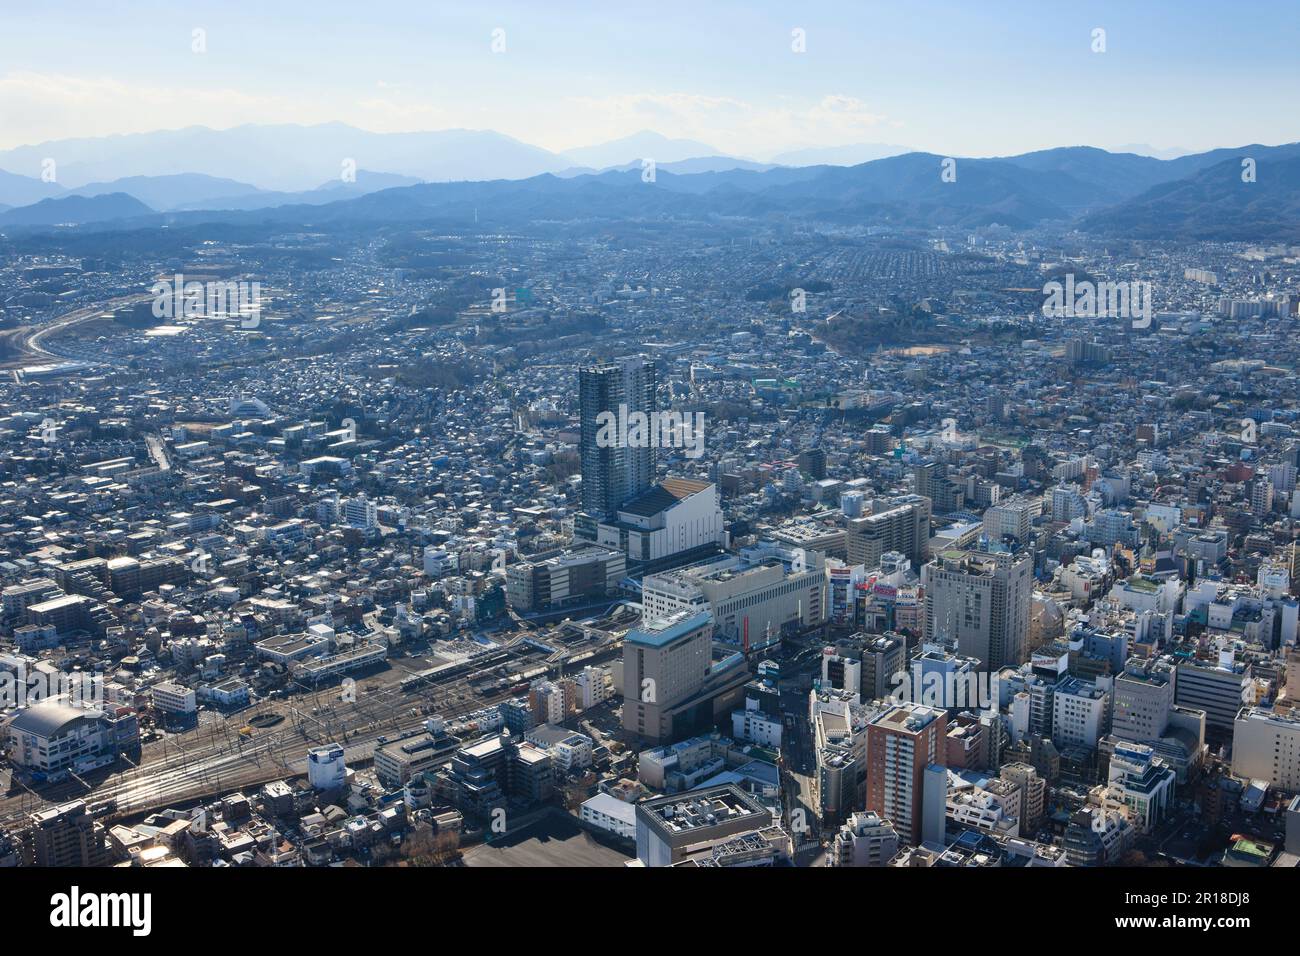 Aerial shot of Hachioji station from northeast towards Takao mountain area. Stock Photo